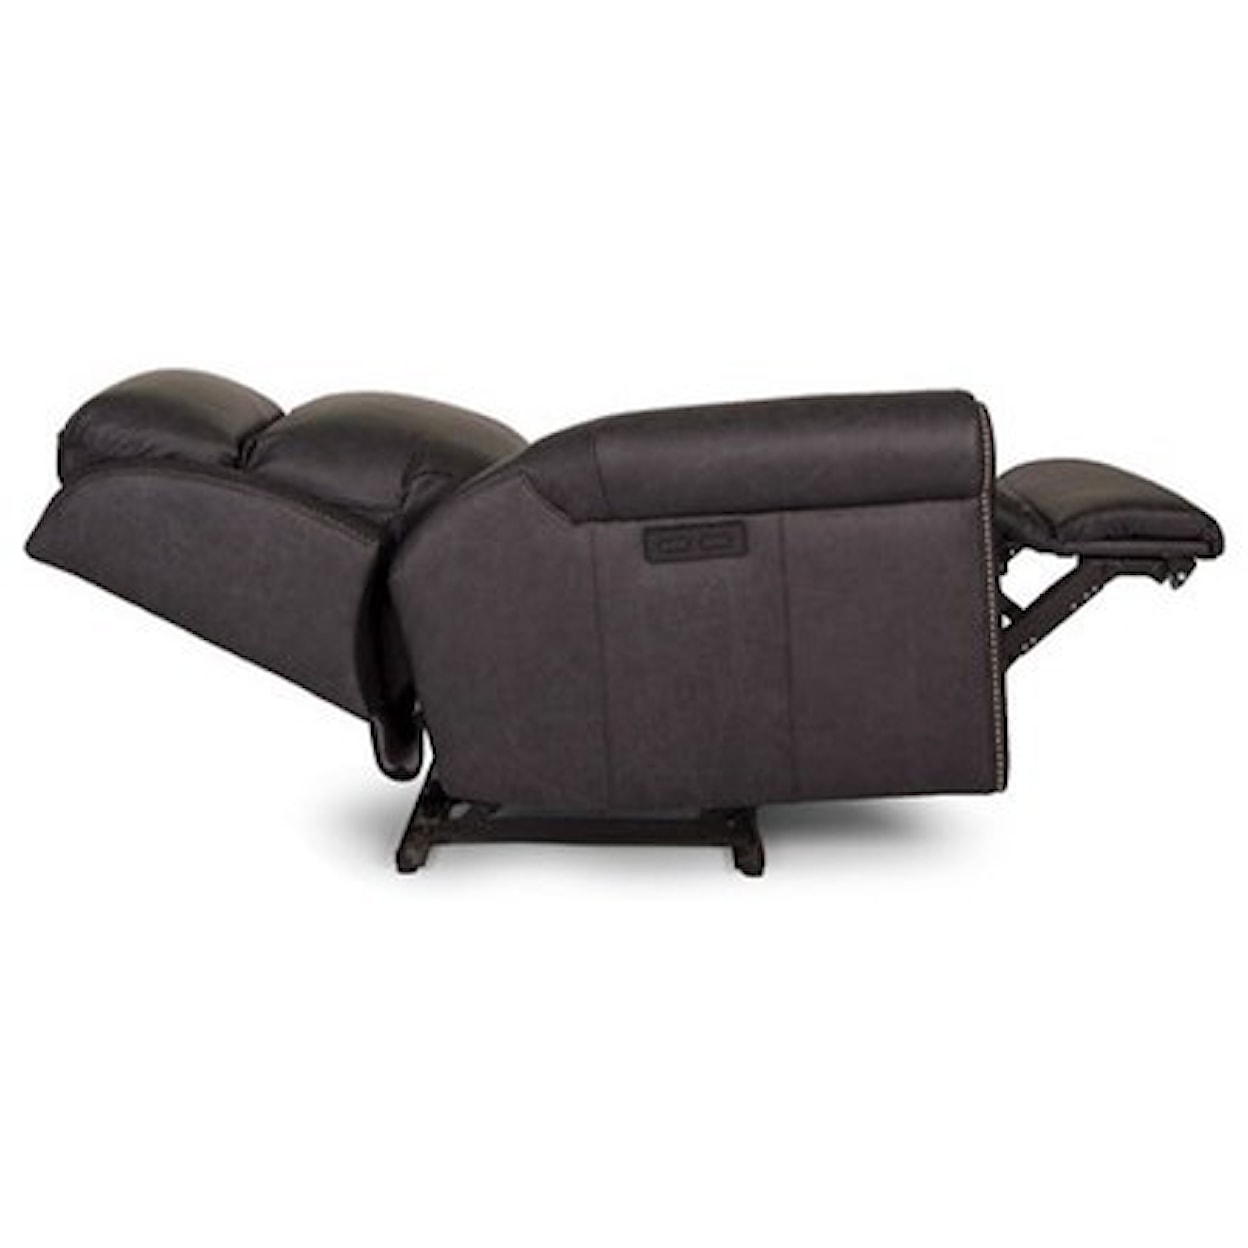 Smith Brothers 422 Power Recliner